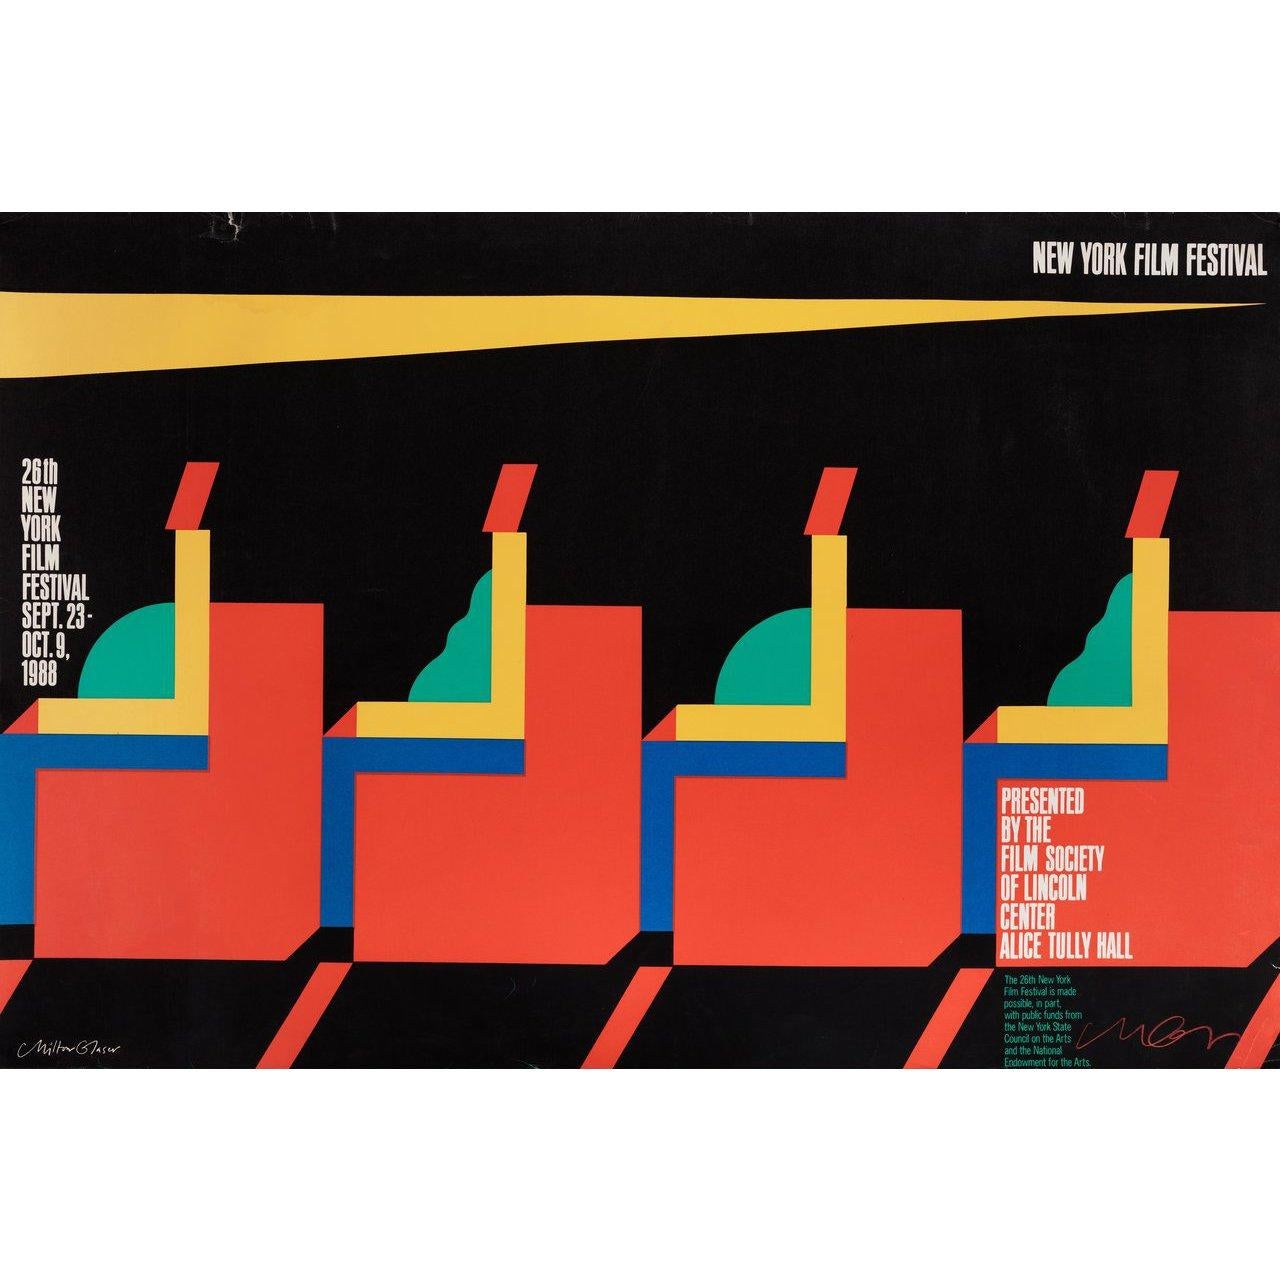 Original 1988 U.S. half subway poster by Milton Glaser for the 1963 festival New York Film Festival. Signed by Milton Glaser. Very Good-Fine condition, rolled. Please note: the size is stated in inches and the actual size can vary by an inch or more.